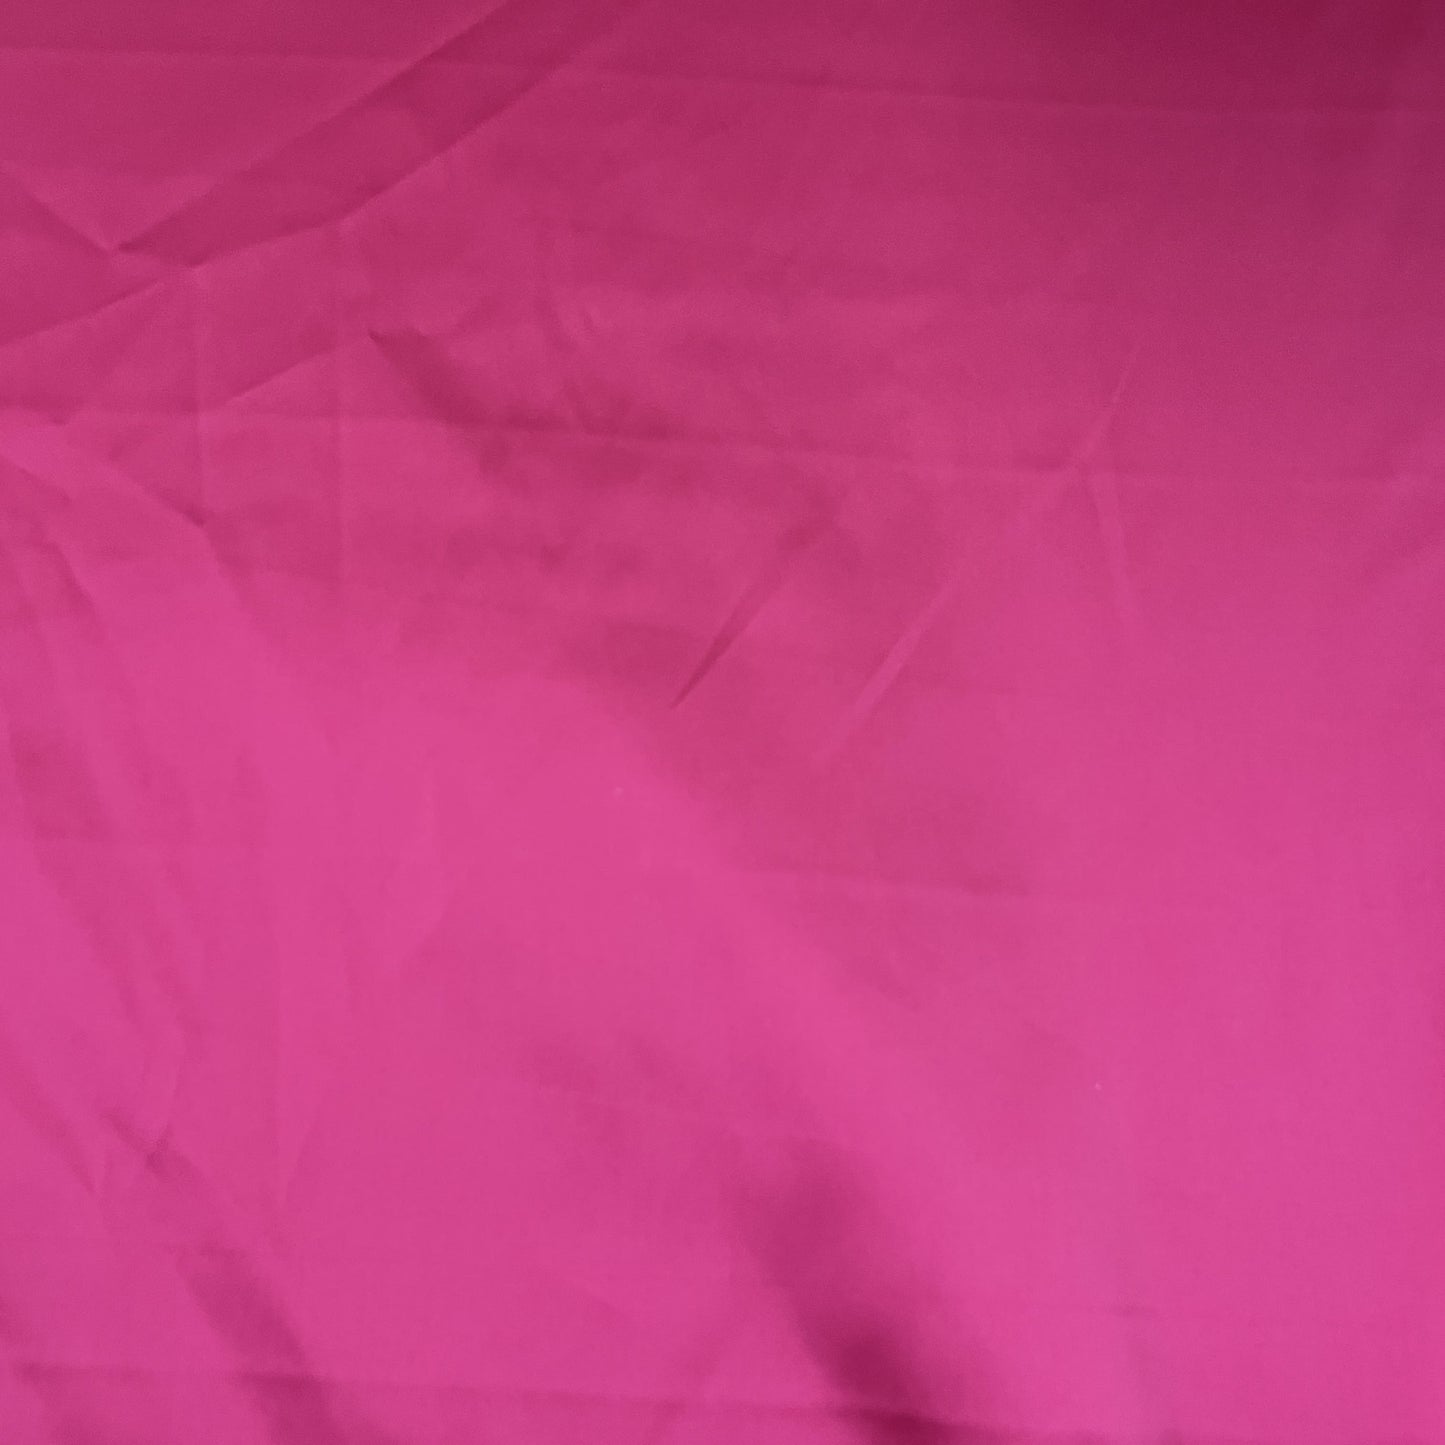 Exclusive Hot Pink Solid Celina Satin Fabric